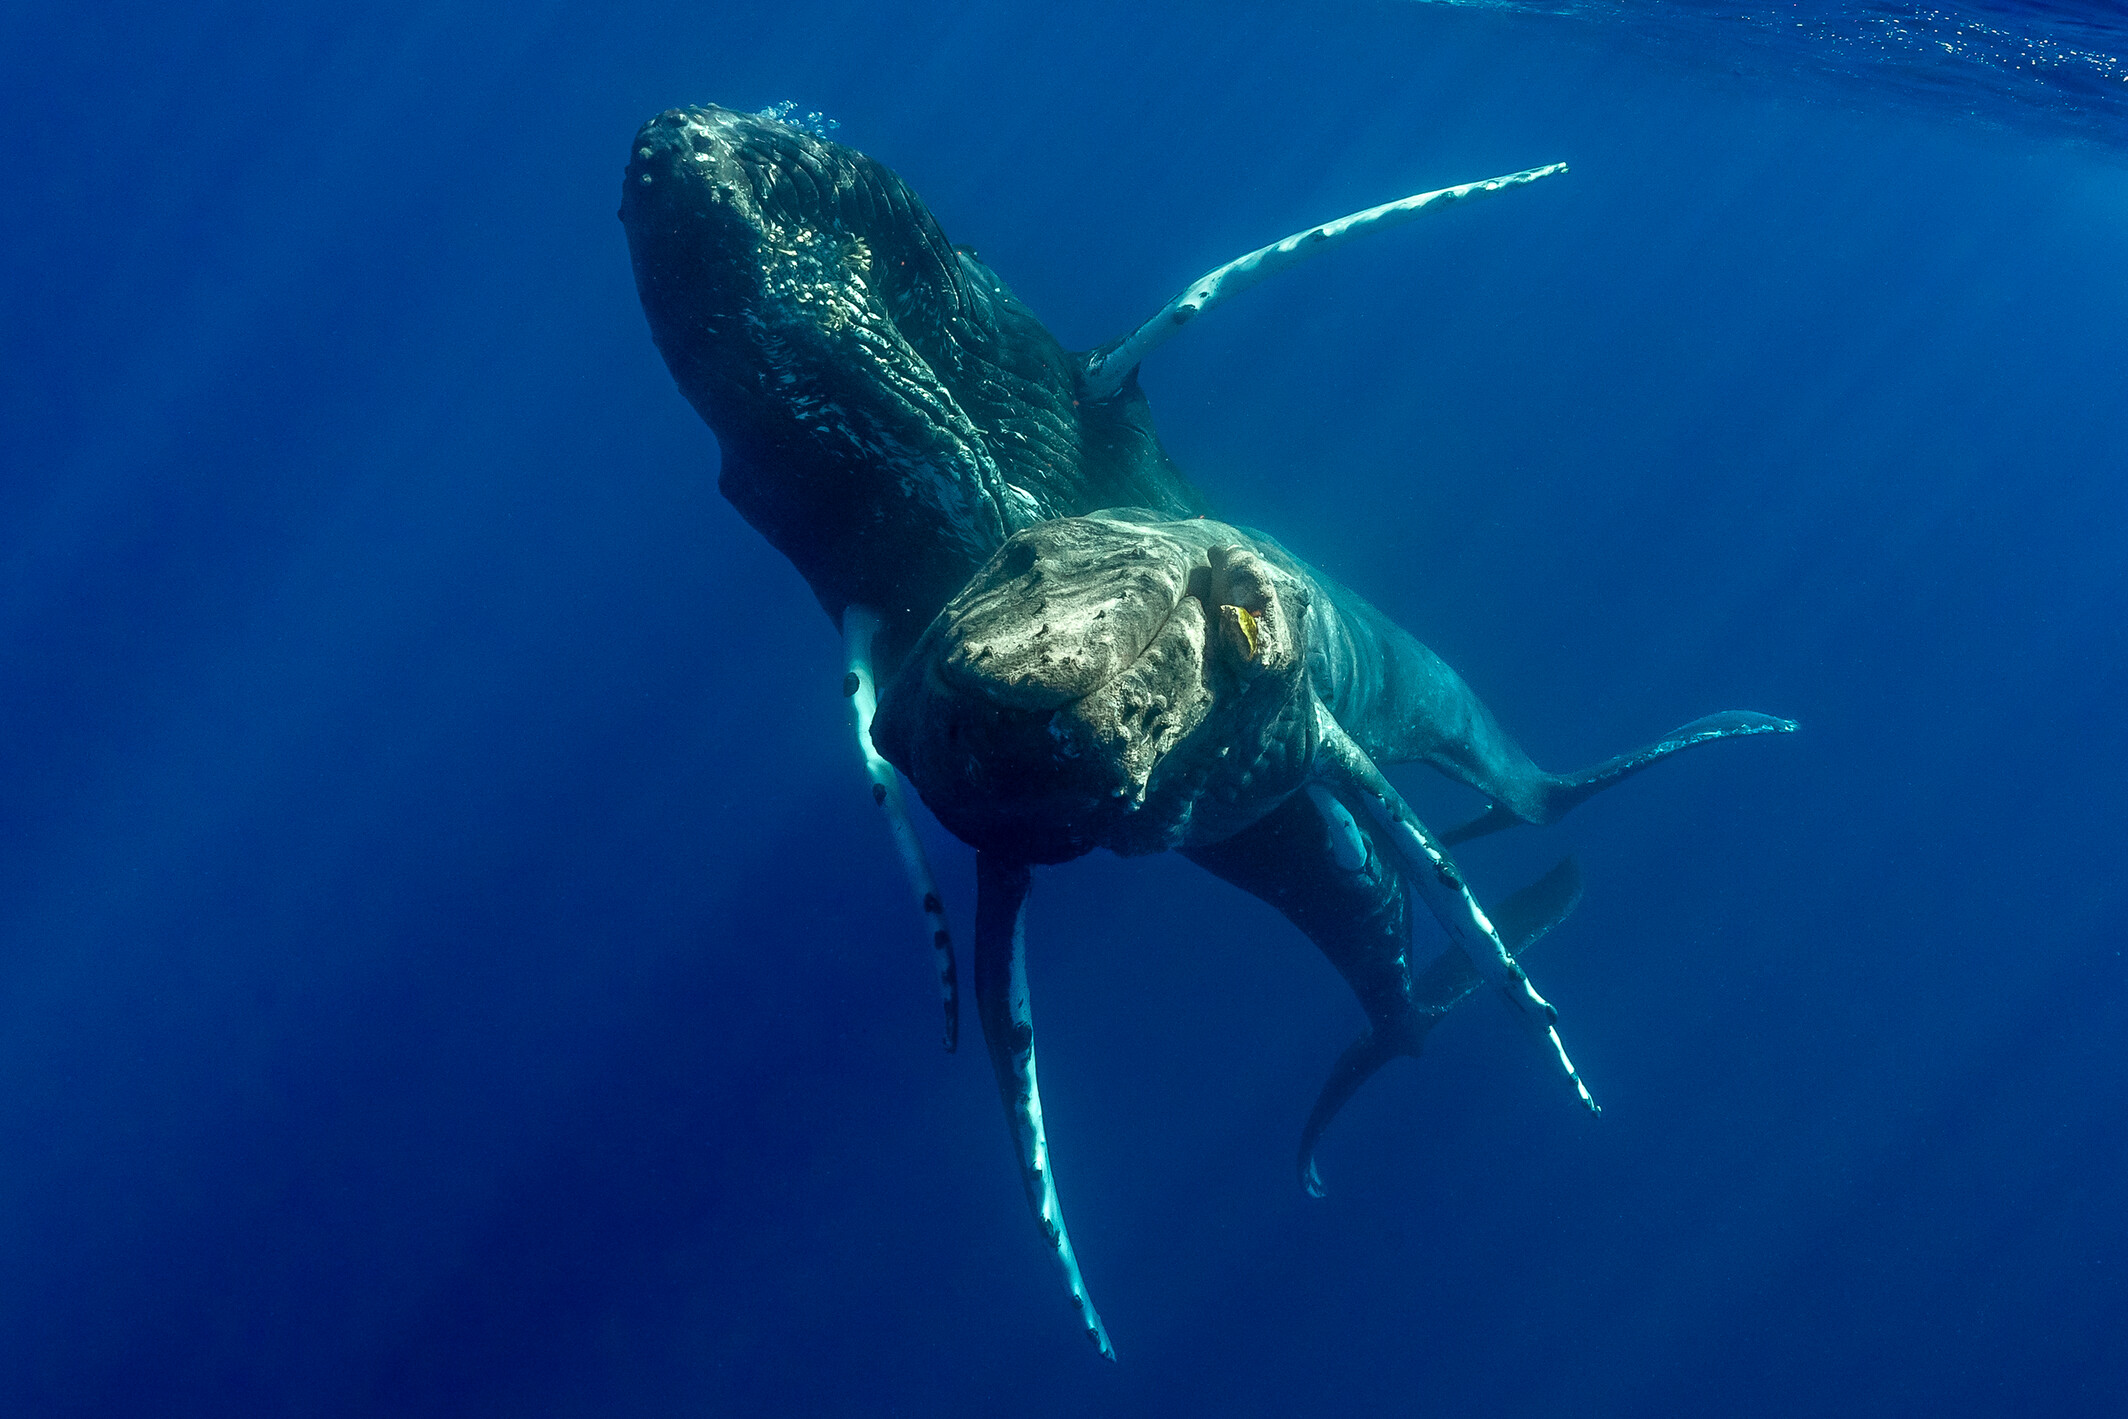 Two adult male humpback whales. one whale has its penis inserted into the genital opening of the whale below it An injury is visible on the mandible of the whale underneath.